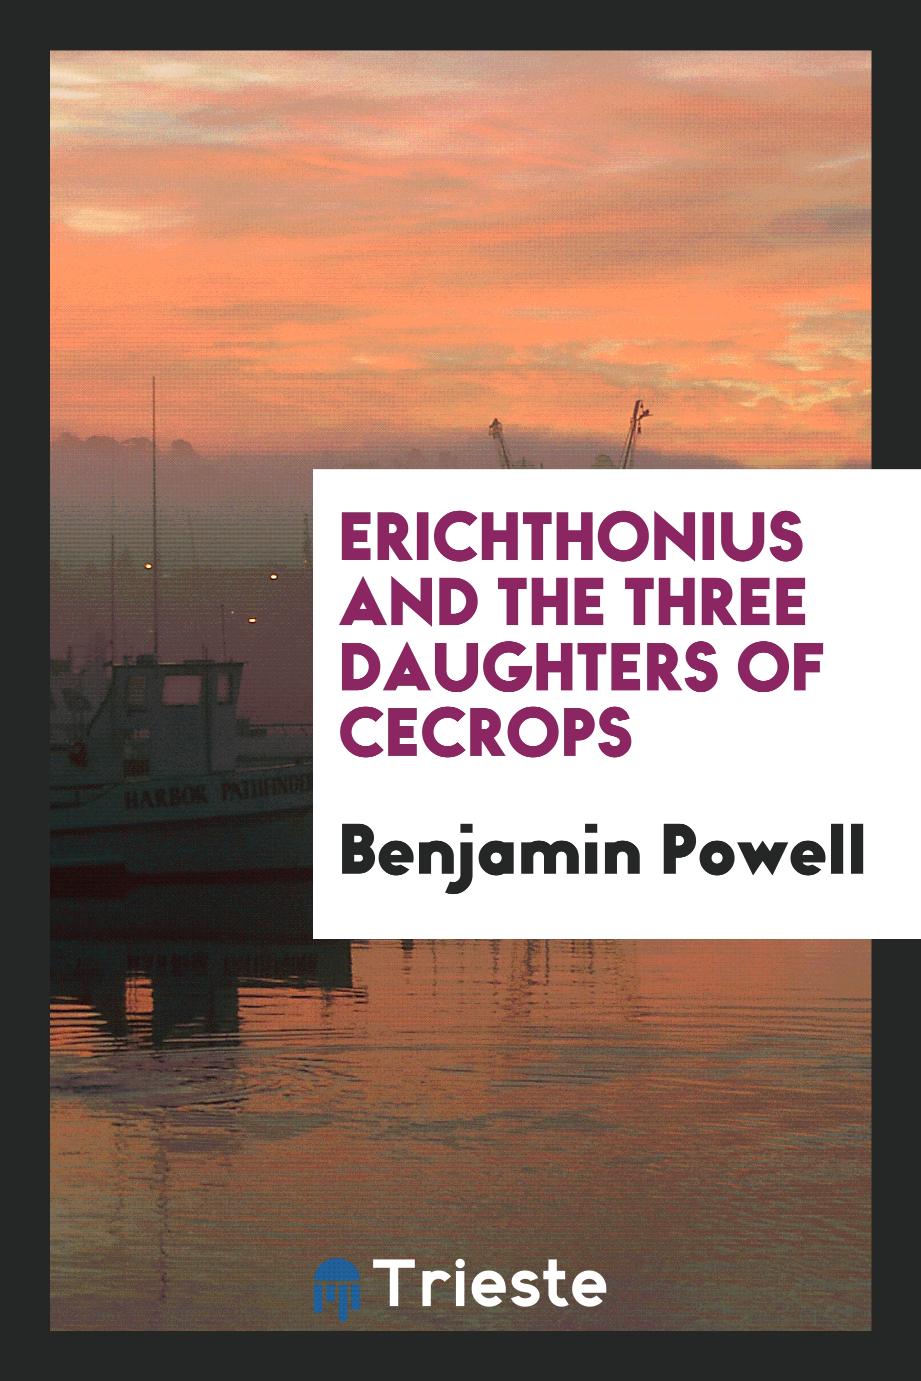 Erichthonius and the Three Daughters of Cecrops